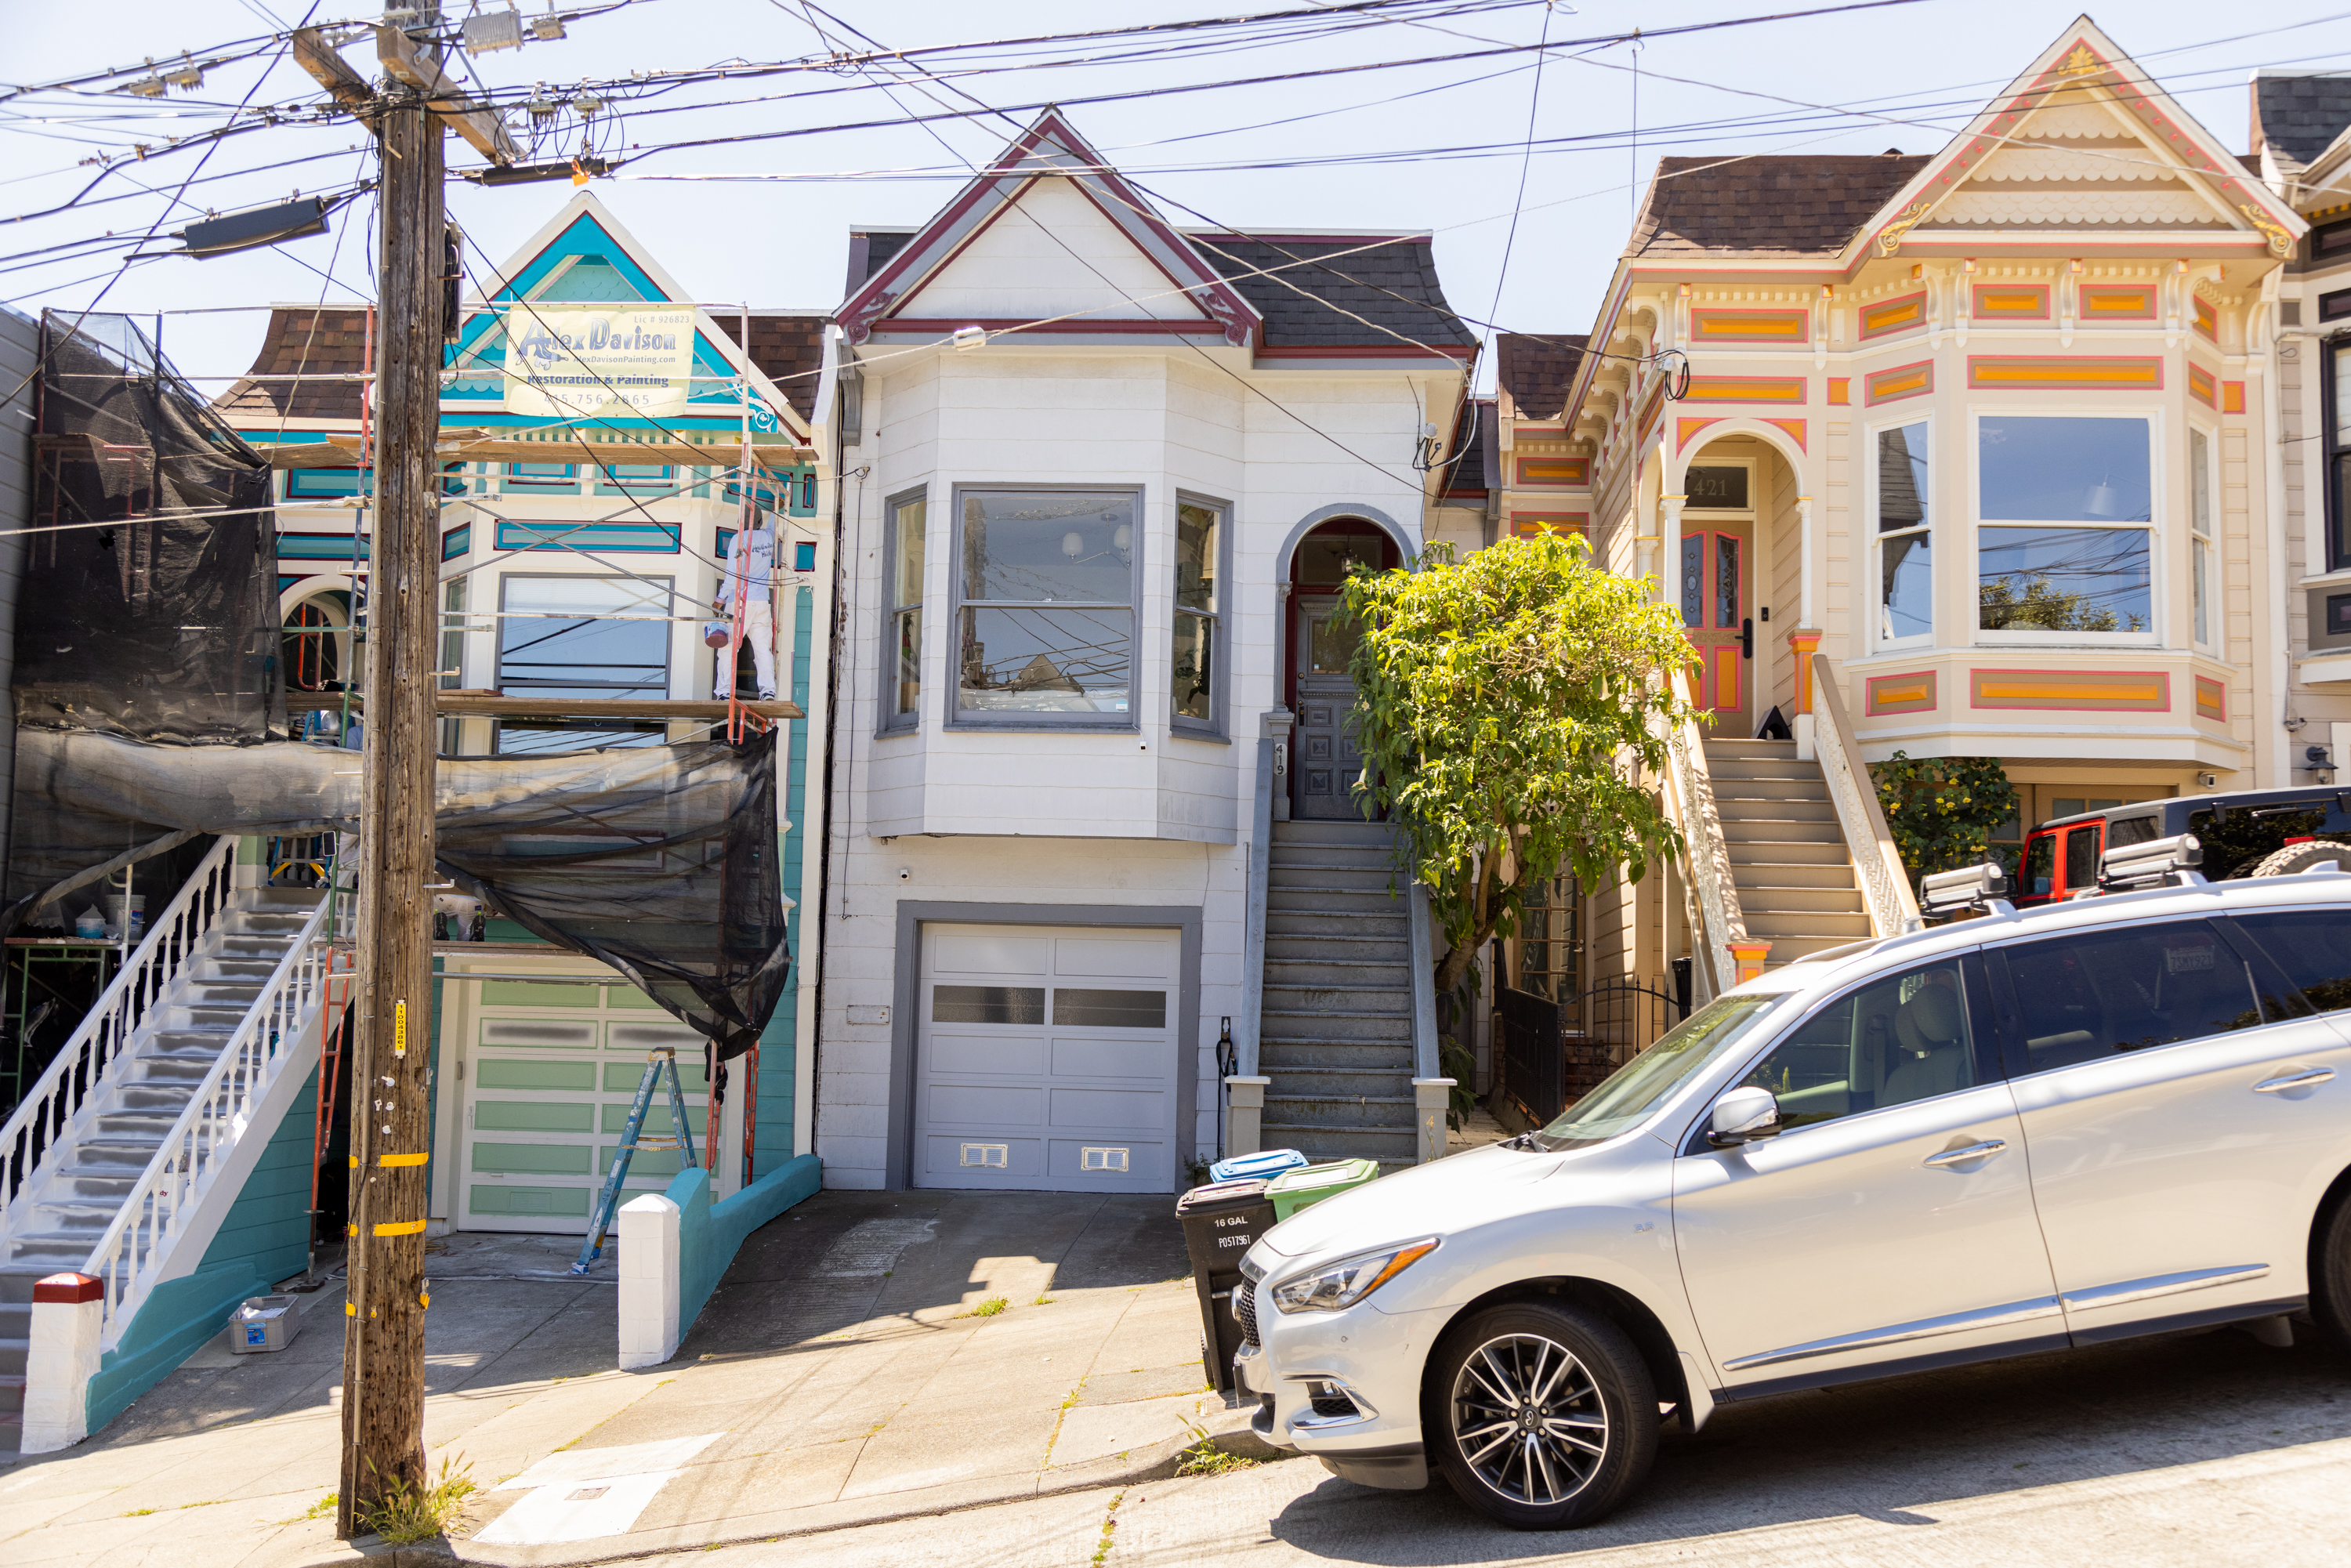 Victorian houses on a sunny, steep street with a parked car in the foreground.